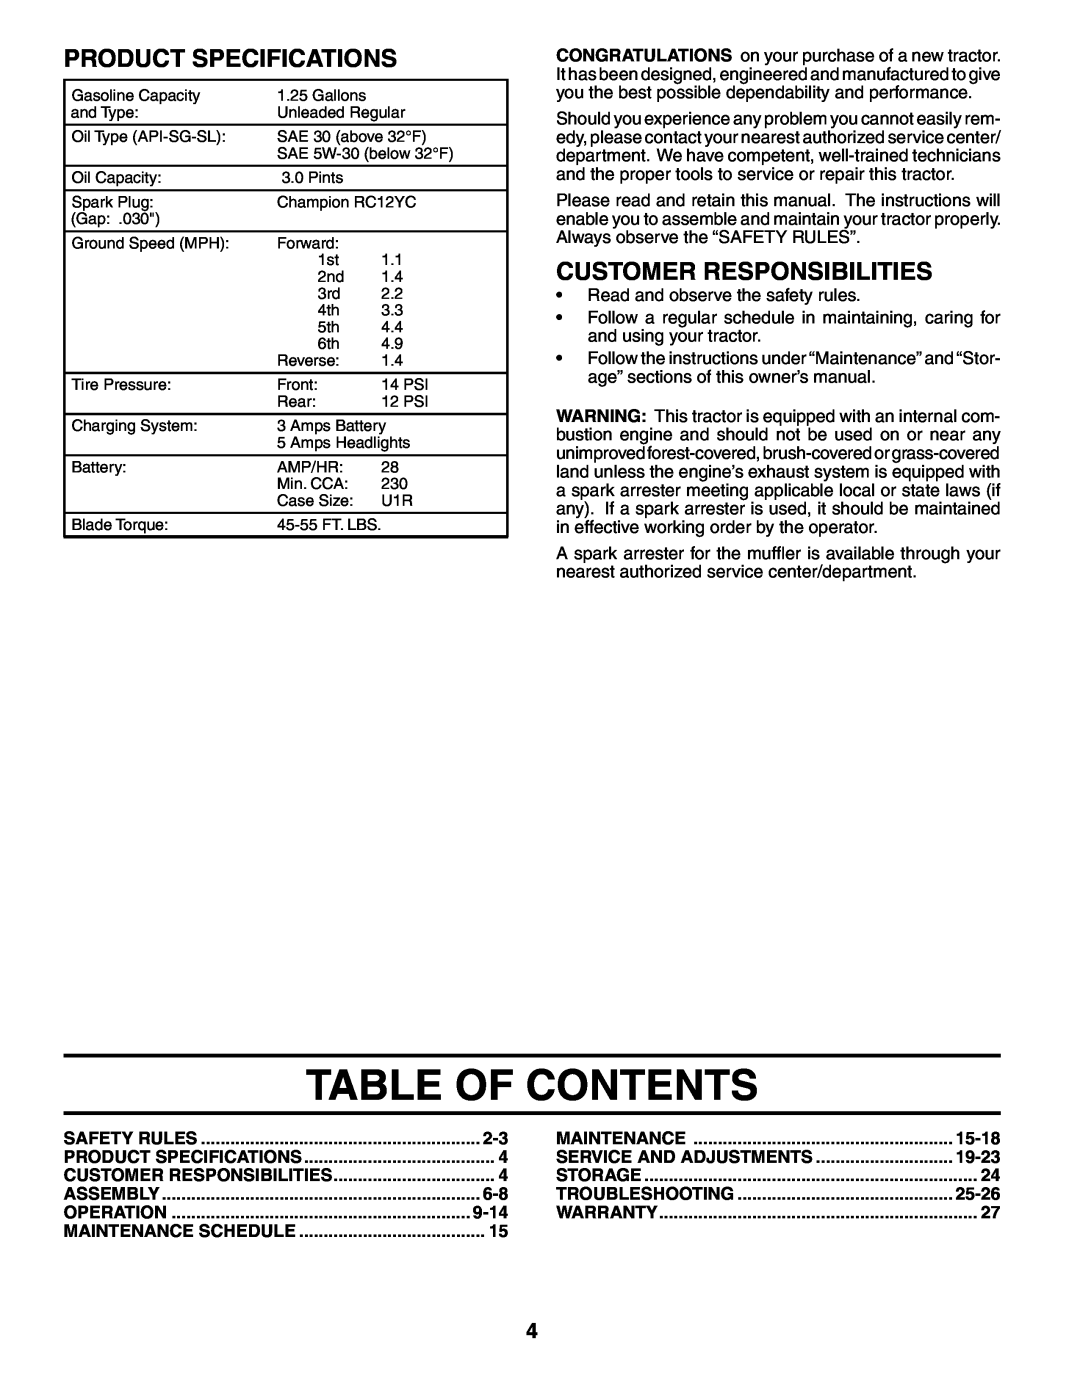 Weed Eater HD13538 manual Table Of Contents, Product Specifications, Customer Responsibilities, 9-14, 15-18, 19-23, 25-26 